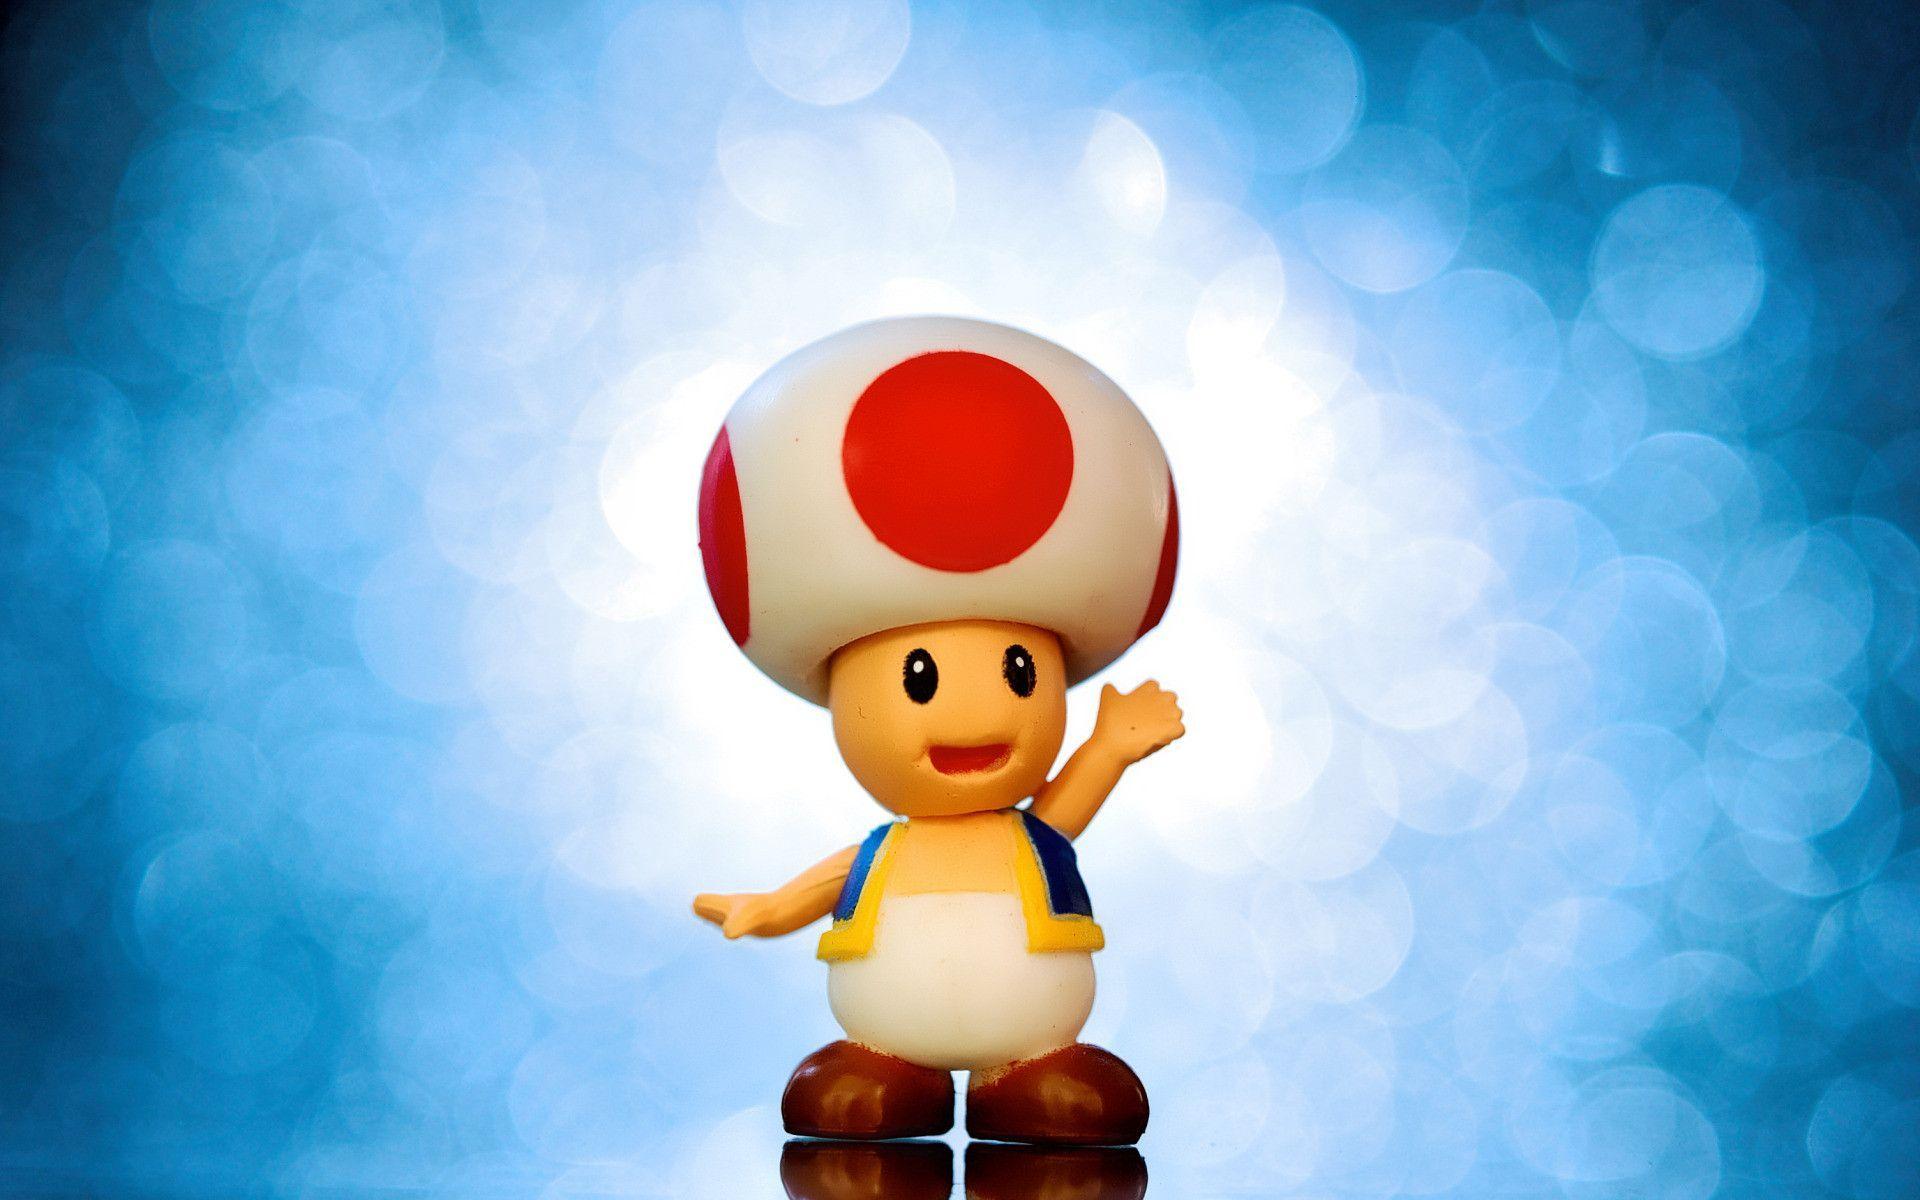 Toad Wallpapers Wallpaper Cave